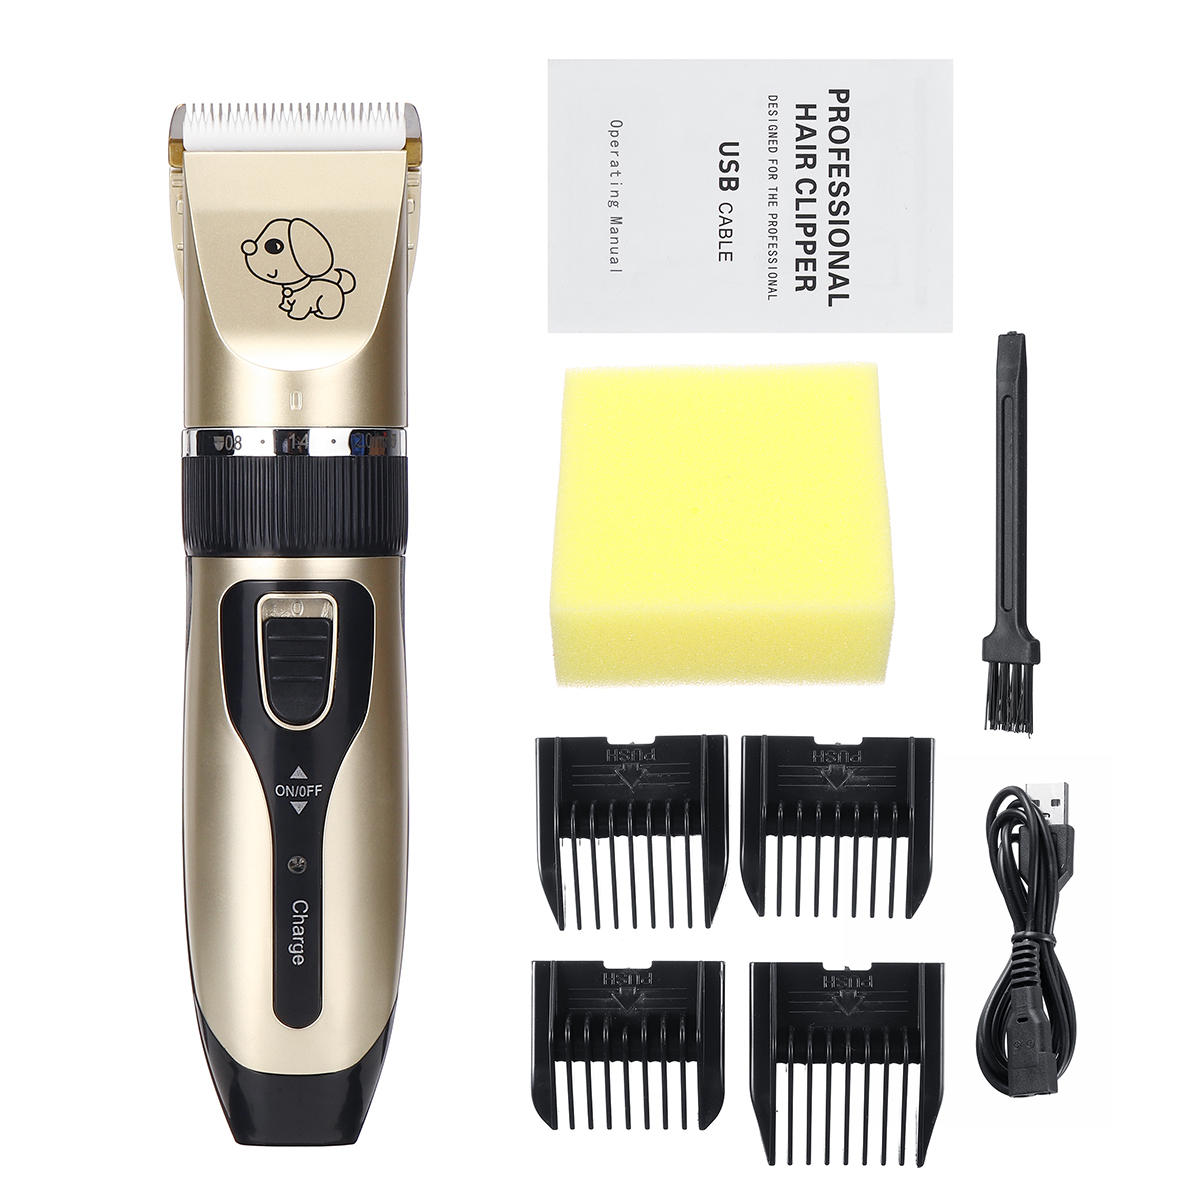 Professional Pet Cat Dog Cordless Clipper Grooming Electric USB Rechargeable Hair Trimmer Kit W/ Combs and Sponge